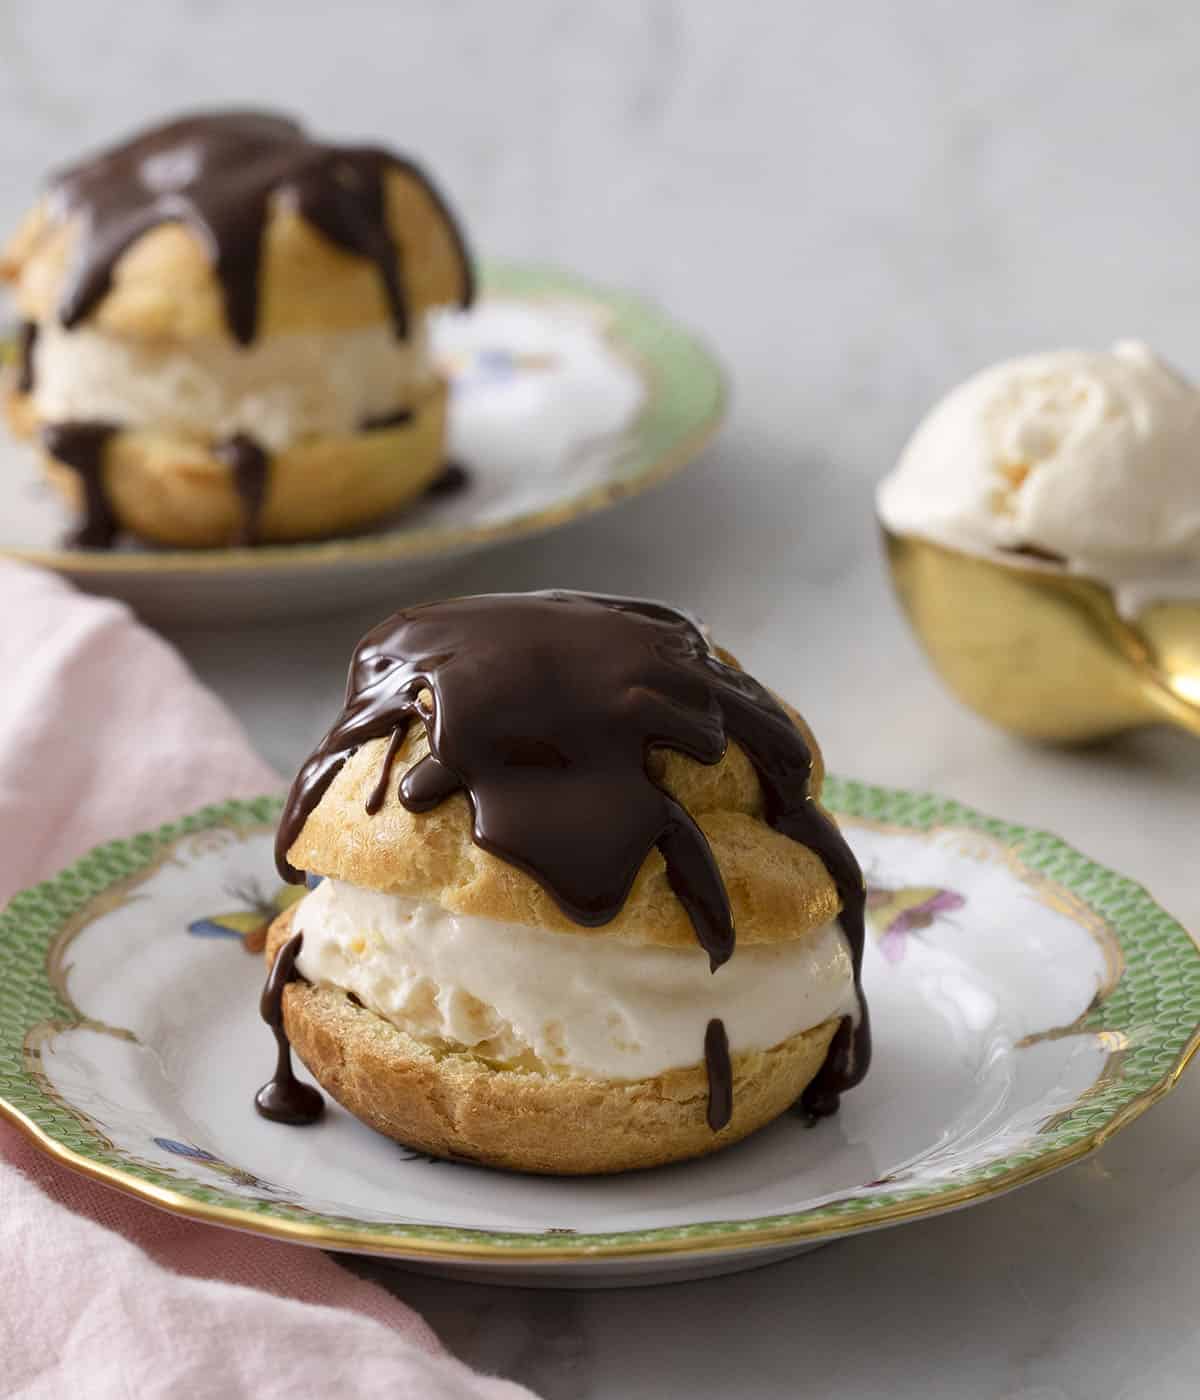 Two profiteroles filled with vanilla ice cream and topped with melted chocolate.